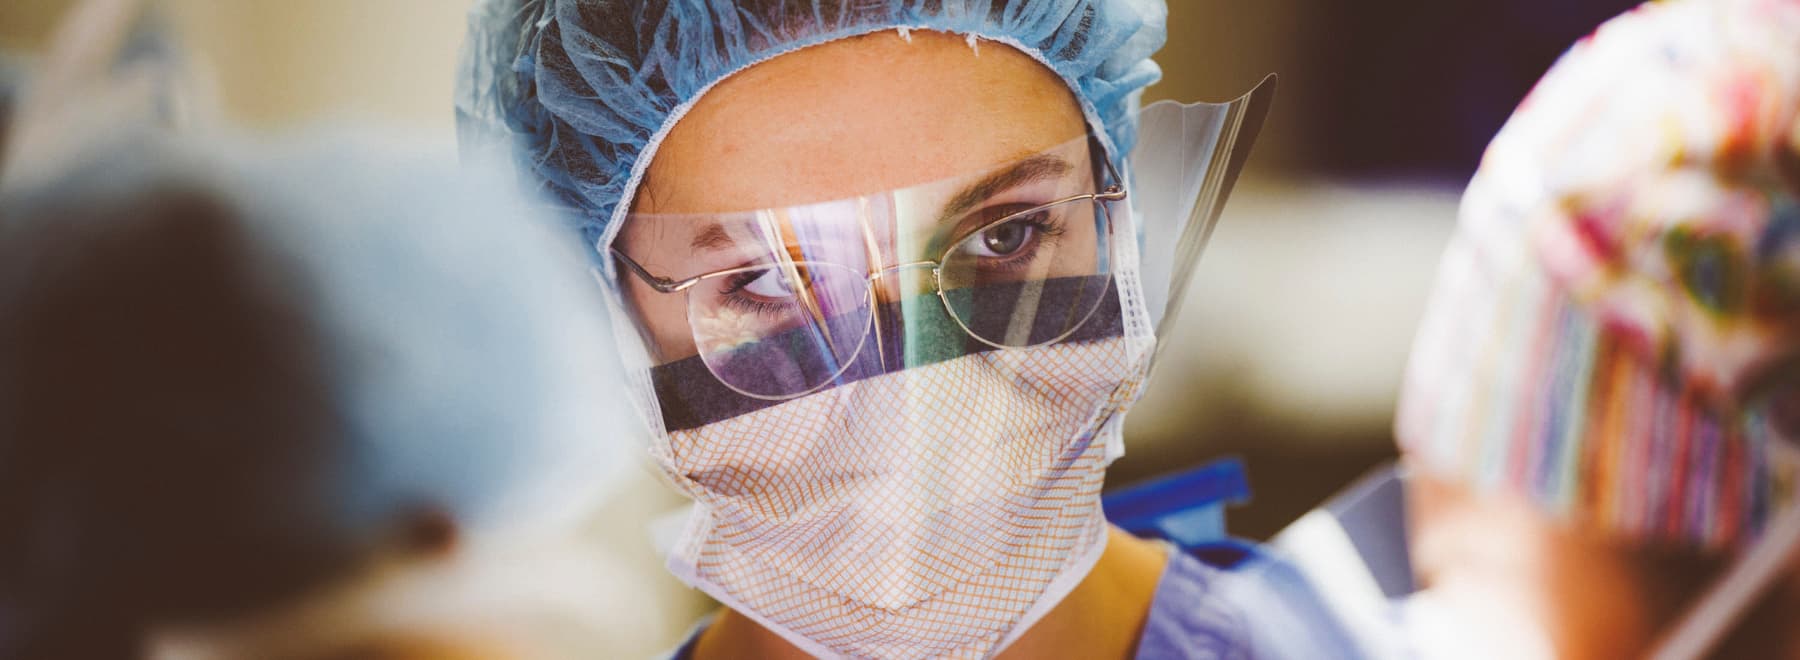 Woman during surgery.